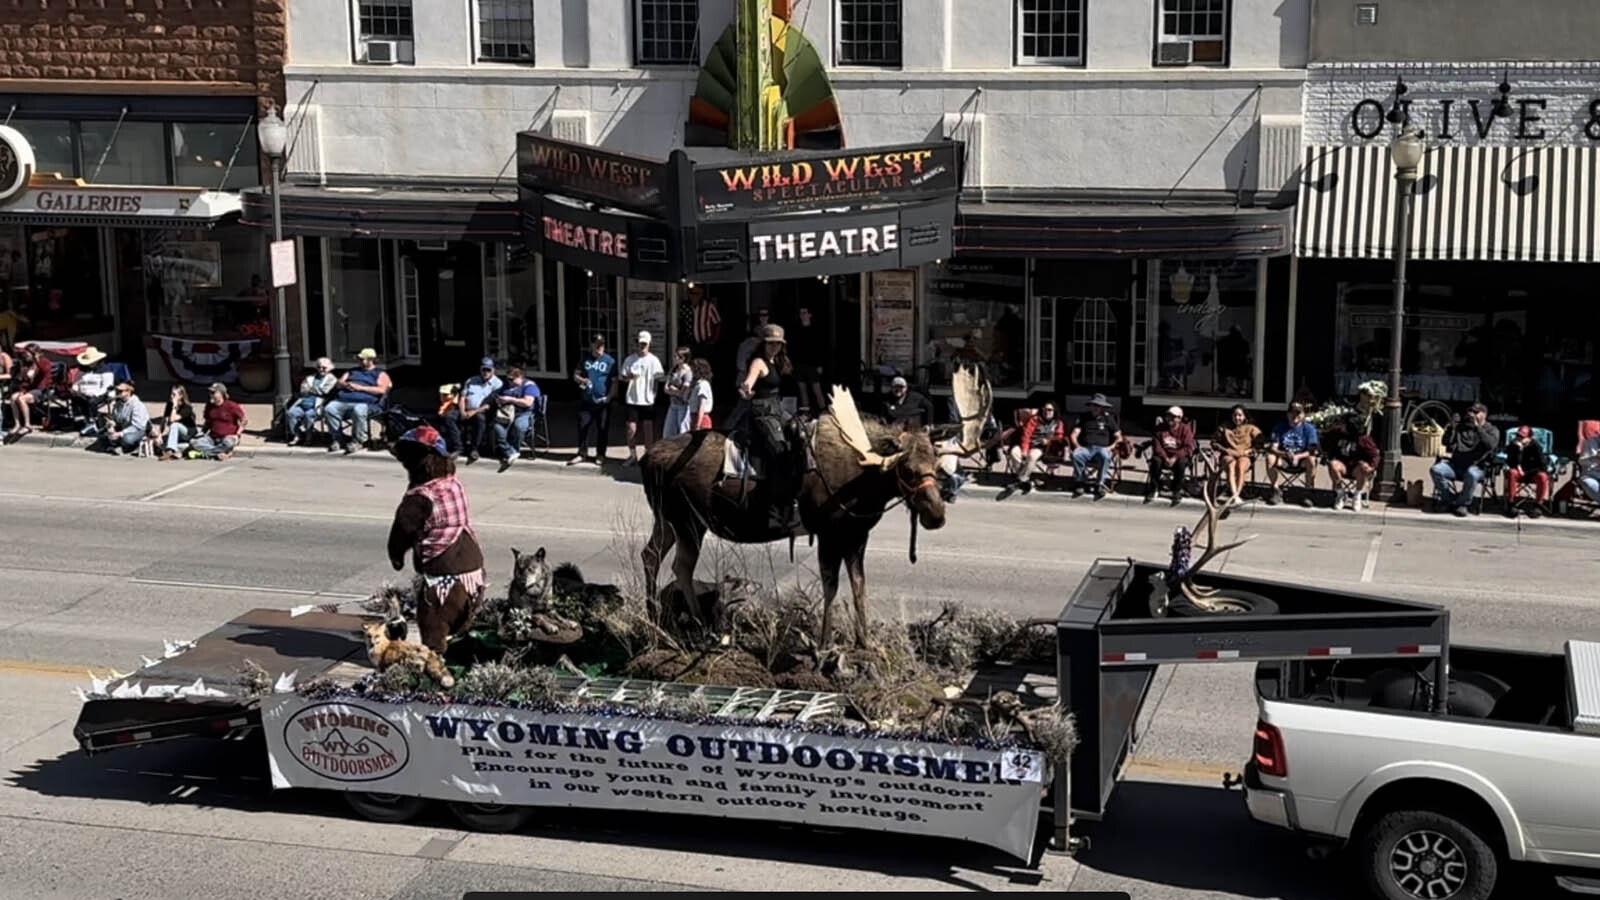 The Wyoming Outdoorsman present their moose-riding float to great acclaim during the Cody Stampede Parade on July 3, 2024.